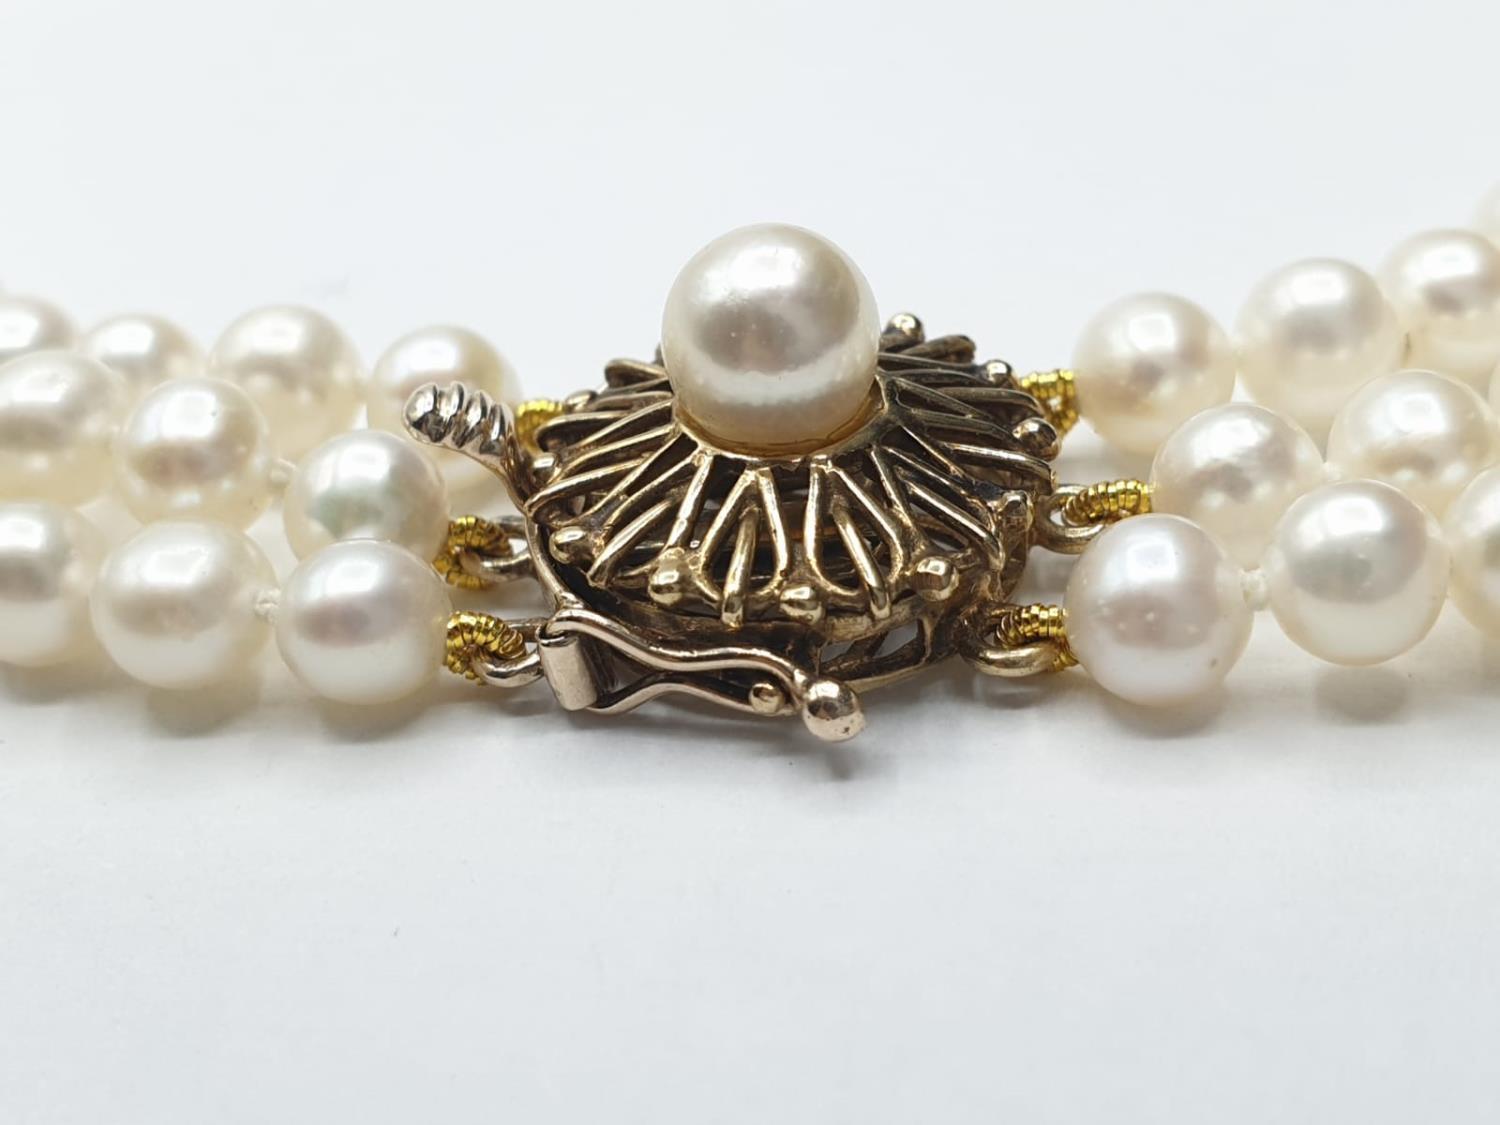 3 rows of Cultured pearl necklace set in 9ct gold clasp , weight 49g and 46cm long approx - Image 4 of 6